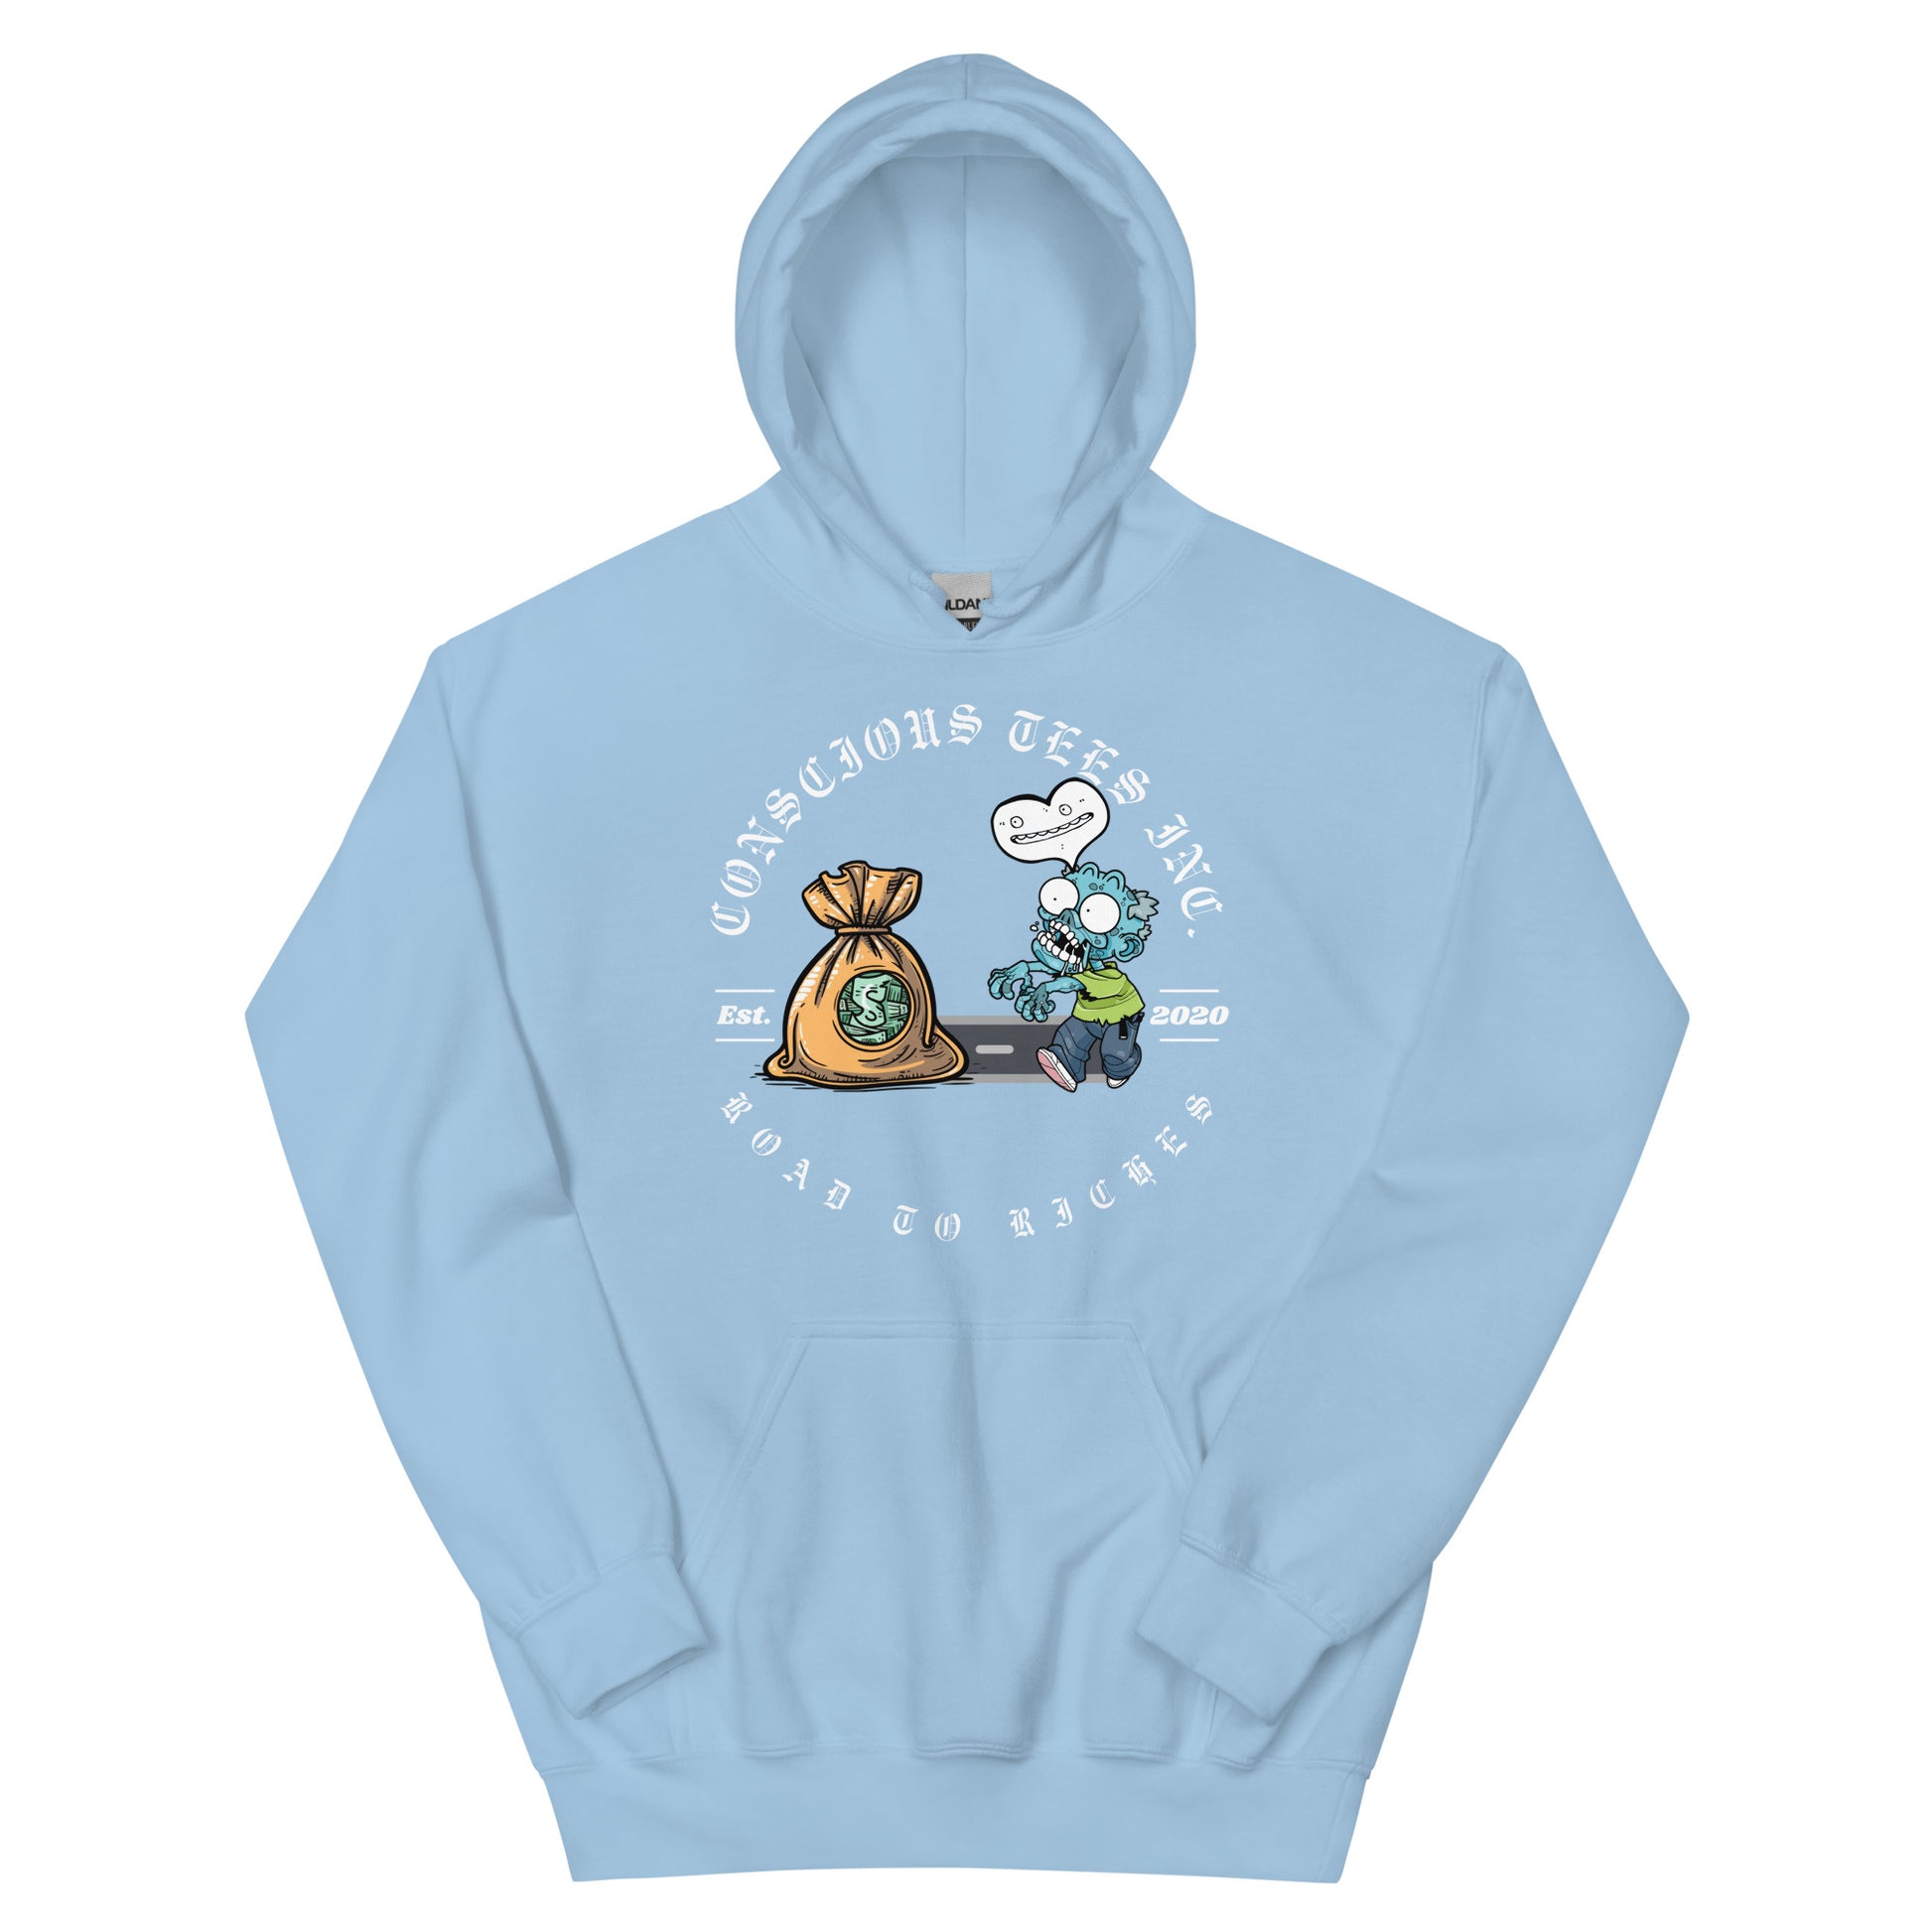 Road to Riches Character Unisex Hoodie - Conscious tees inc.